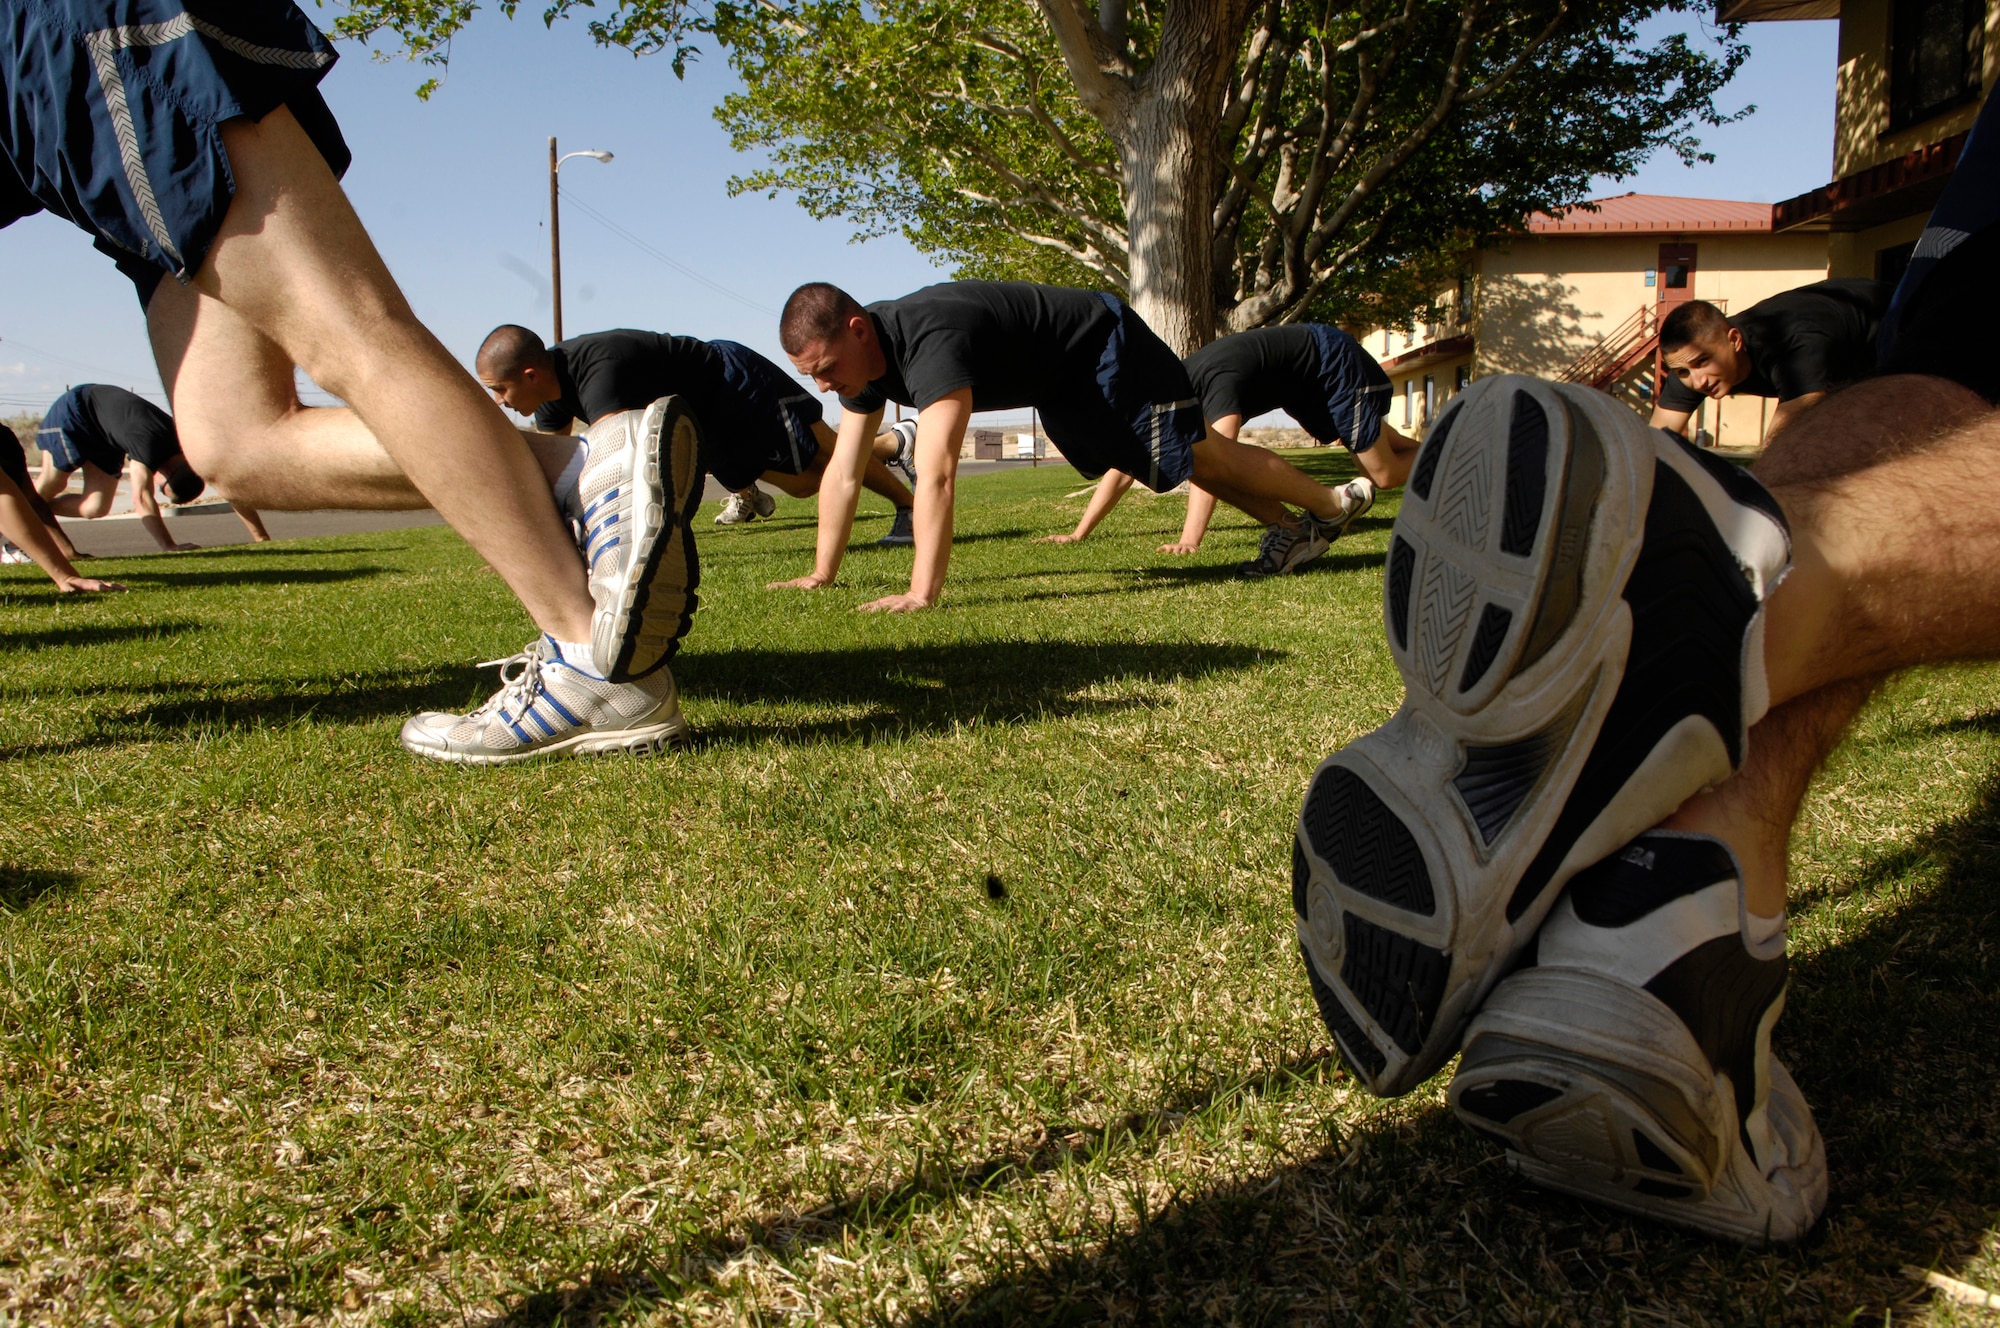 Members of the Air Force Honor Guard Drill Team conduct a group physical training session outside the High Desert Inn at Edwards AFB, Calif. on their recent tour.  Often on the road, these Airmen make use of whatever running and workout space is available to ensure they stay "fit to fight" even as they visit AF bases across the country. (U.S. Air Force photo by Senior Airman Daniel R. DeCook)(Released)